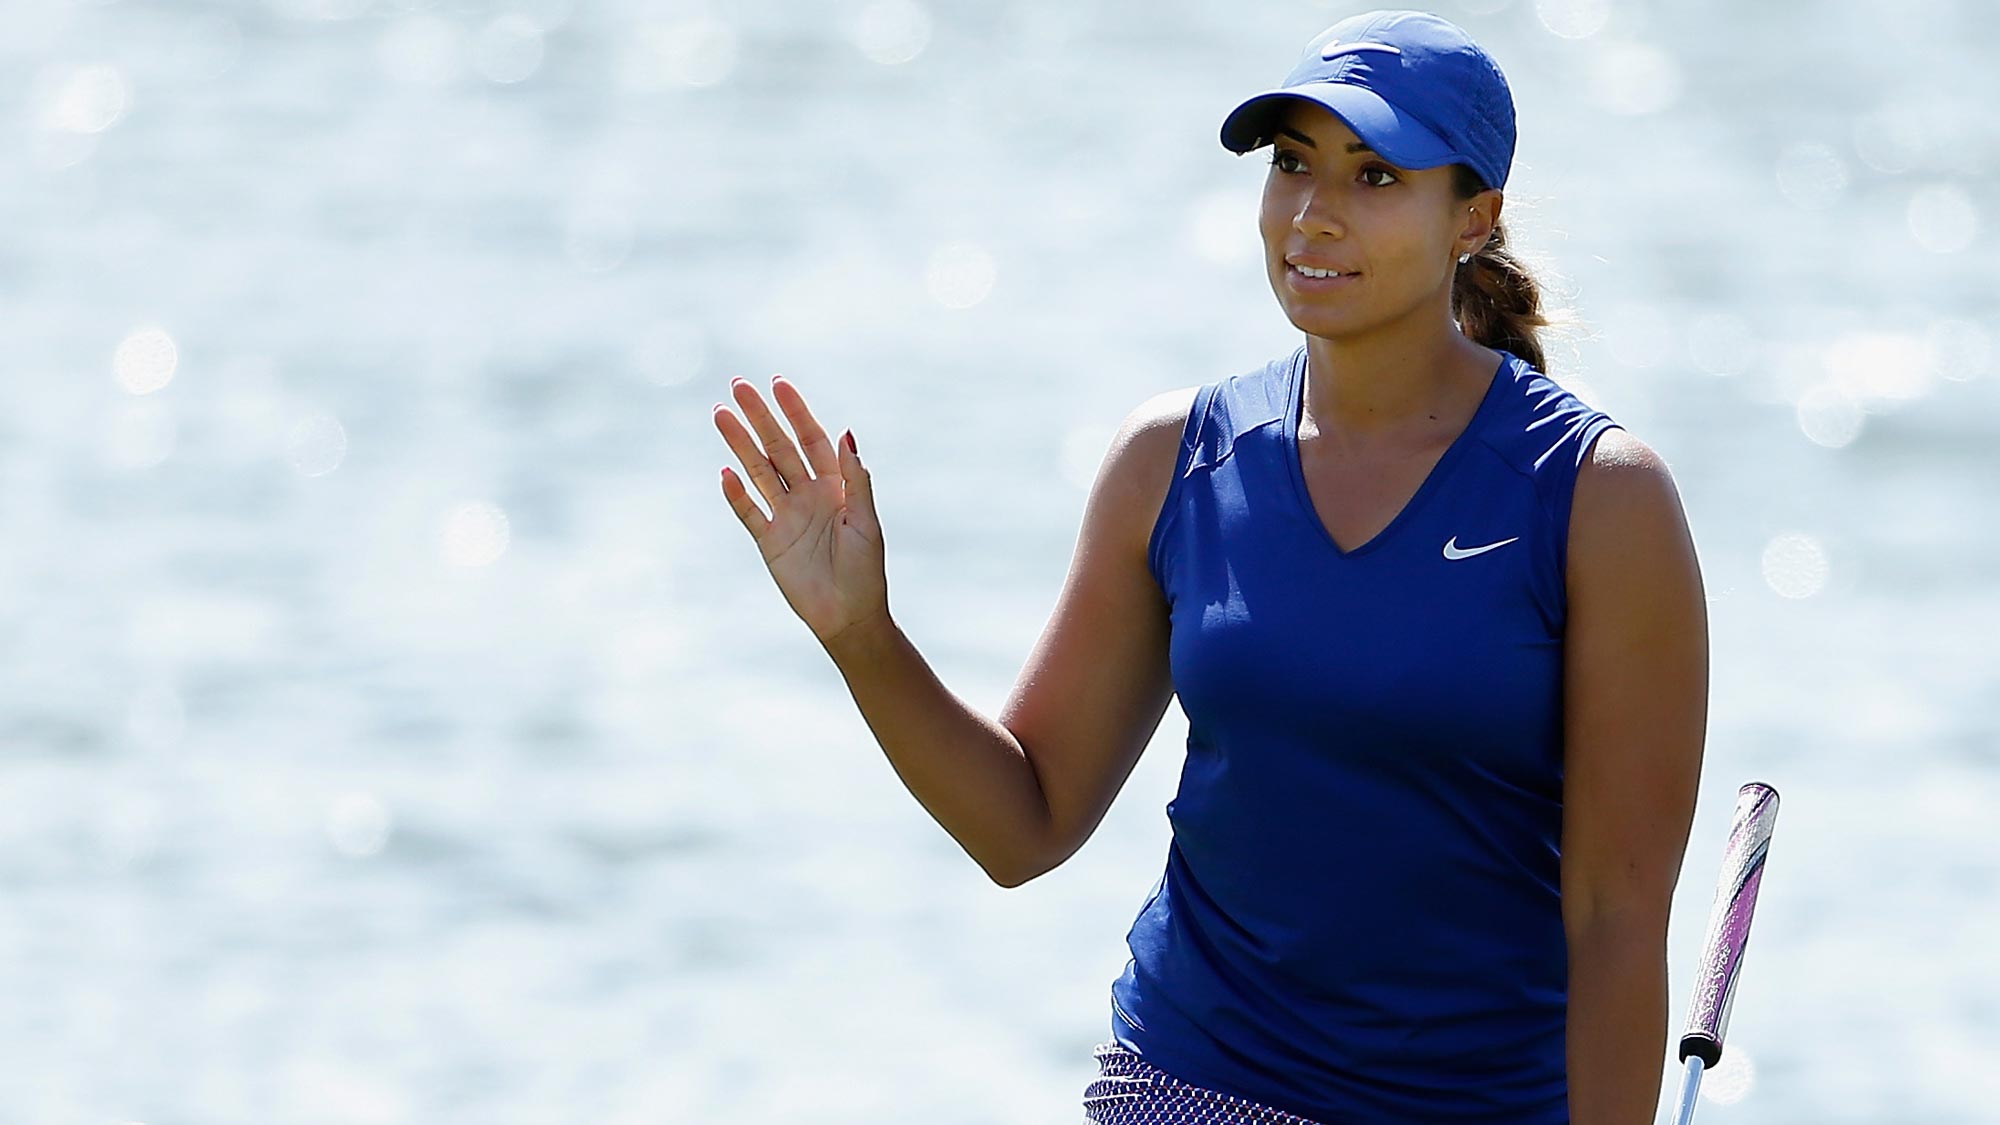 Cheyenne Woods reacts after a par putt on the 18th green during the first round of the LPGA LOTTE Championship Presented By Hershey